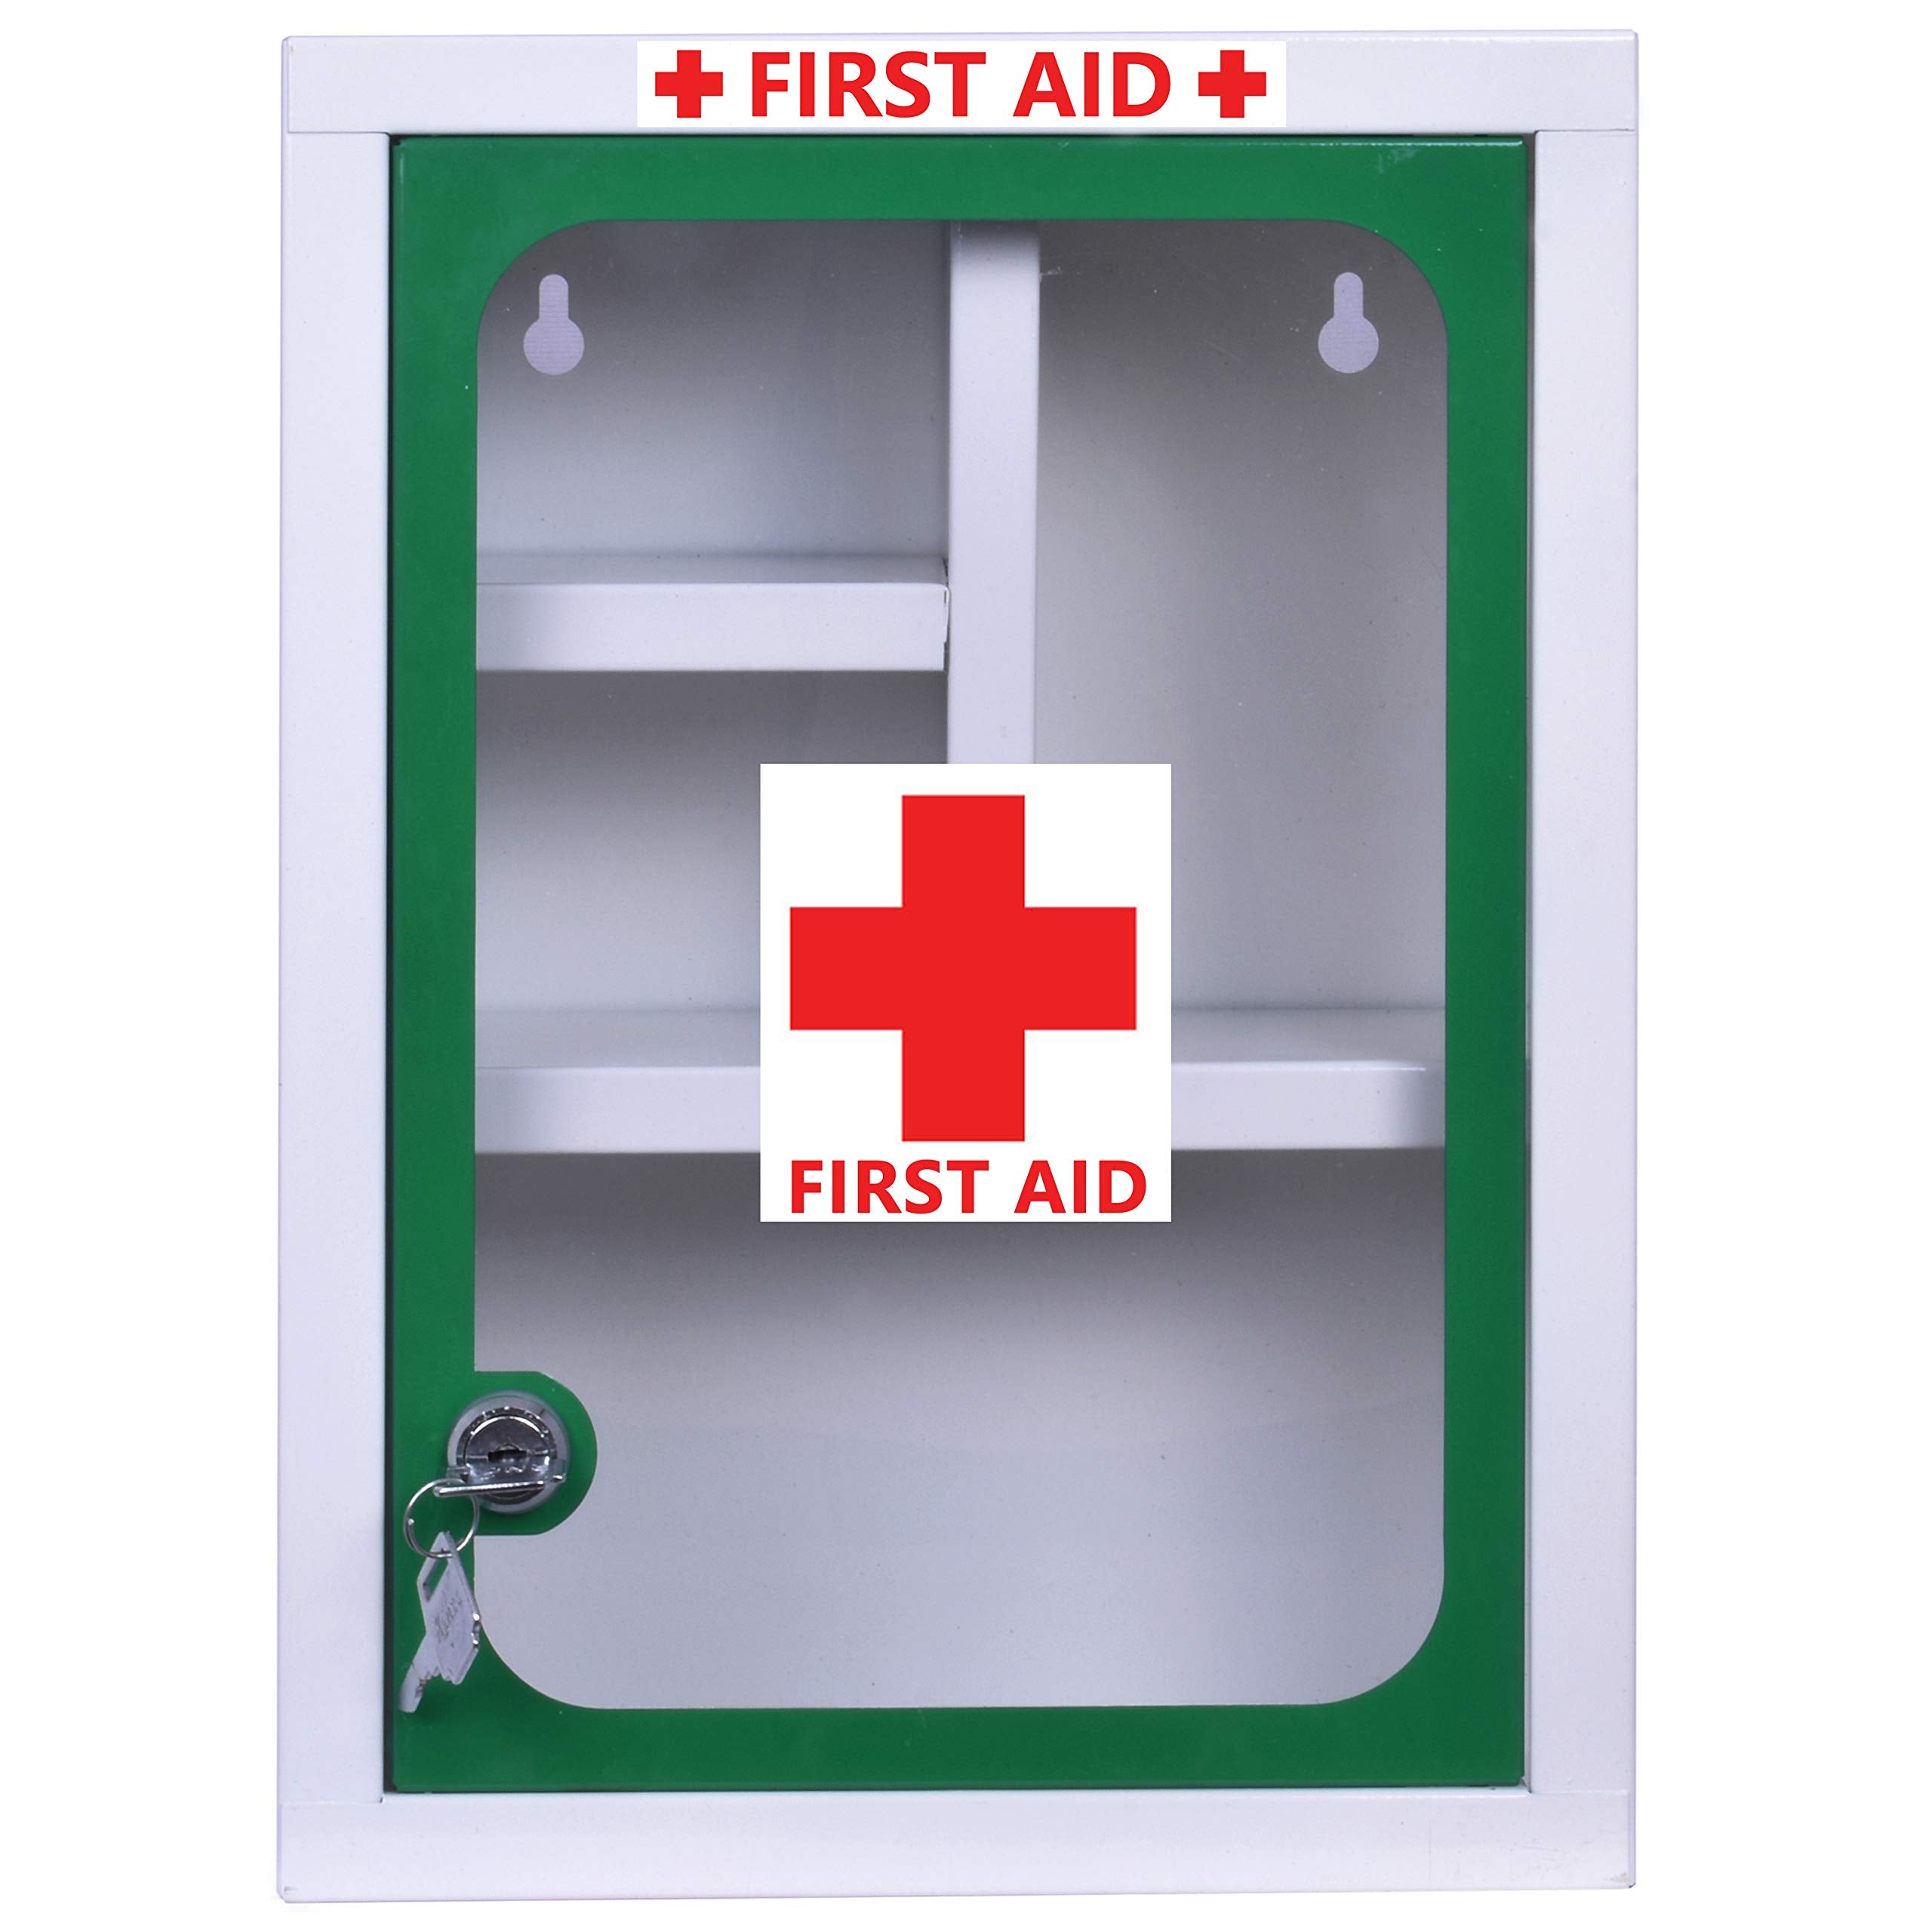 Plantex Big Size Emergency First Aid Kit Box with Multi Compartments for Home/School/Office/Wall (XL, Green and White), Rectangular